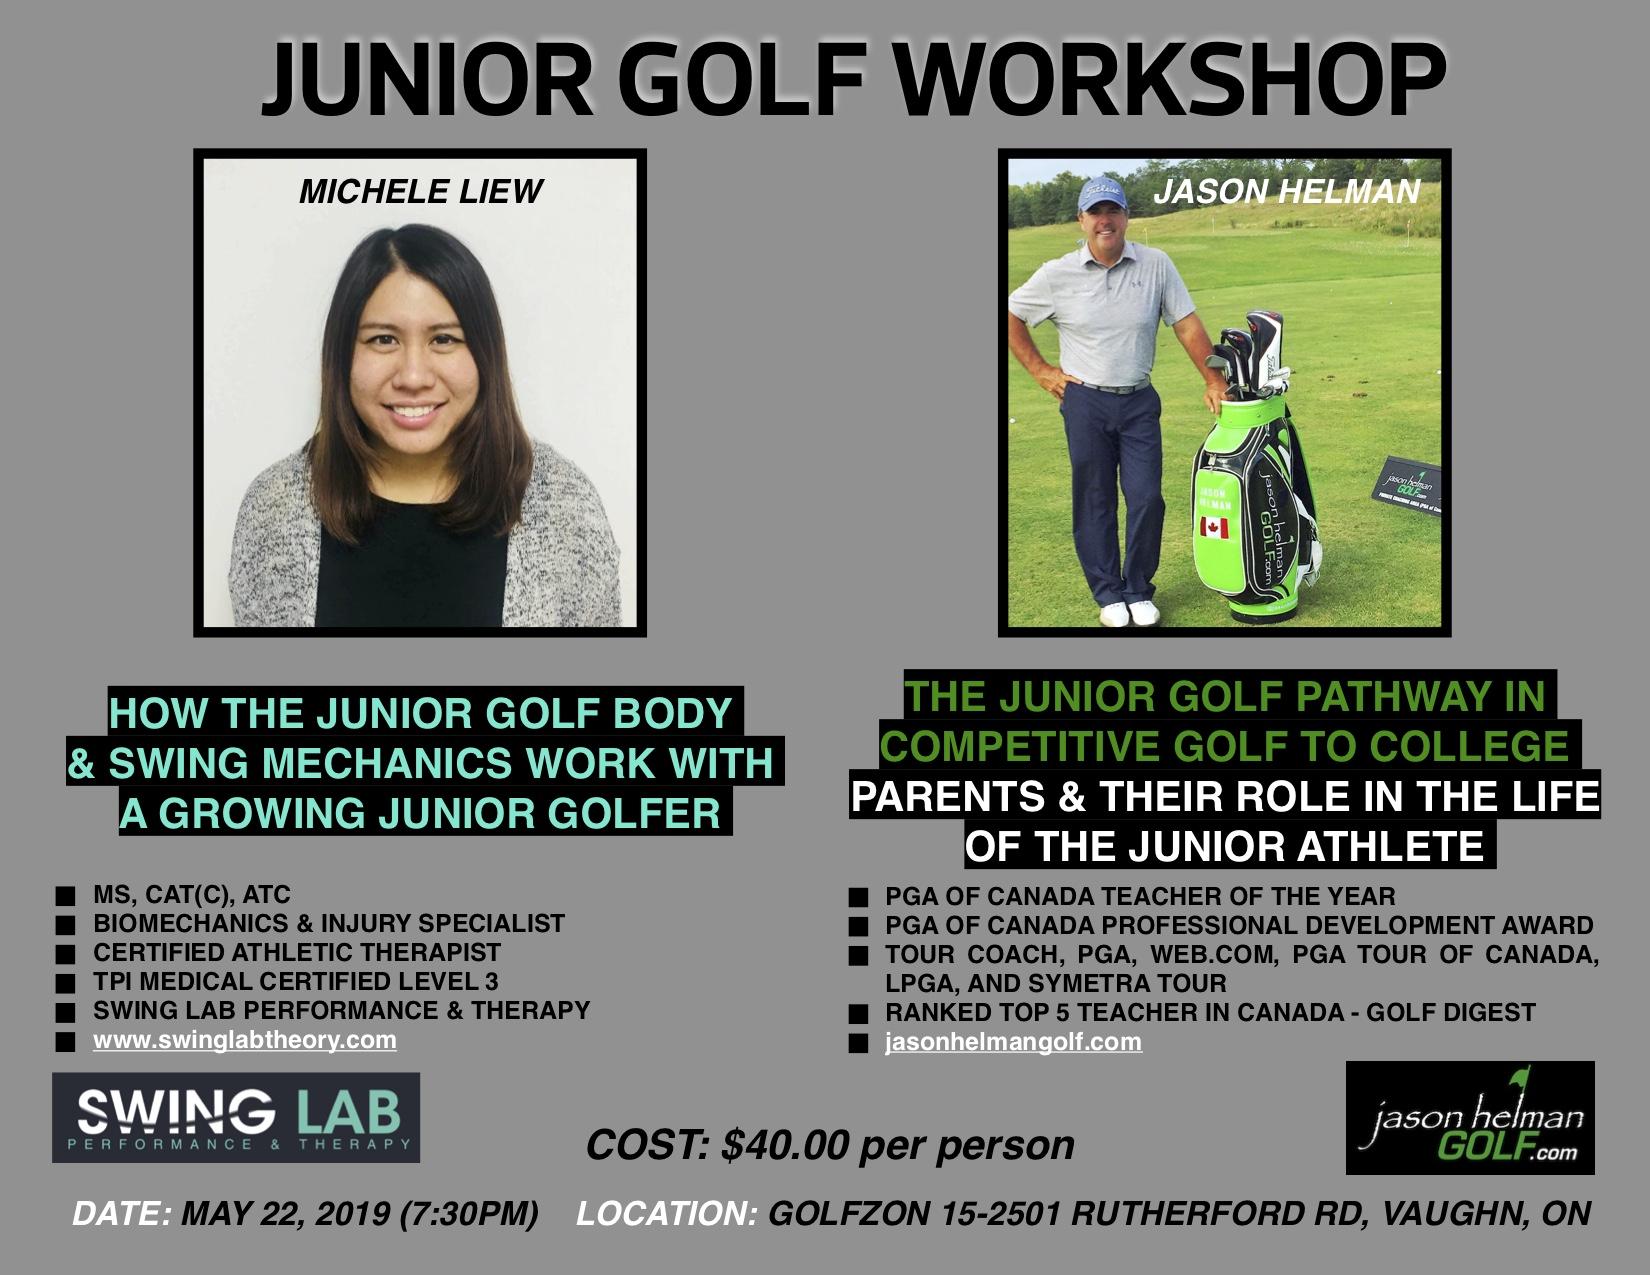 The Junior Golf Pathway in Competitive to College Golf